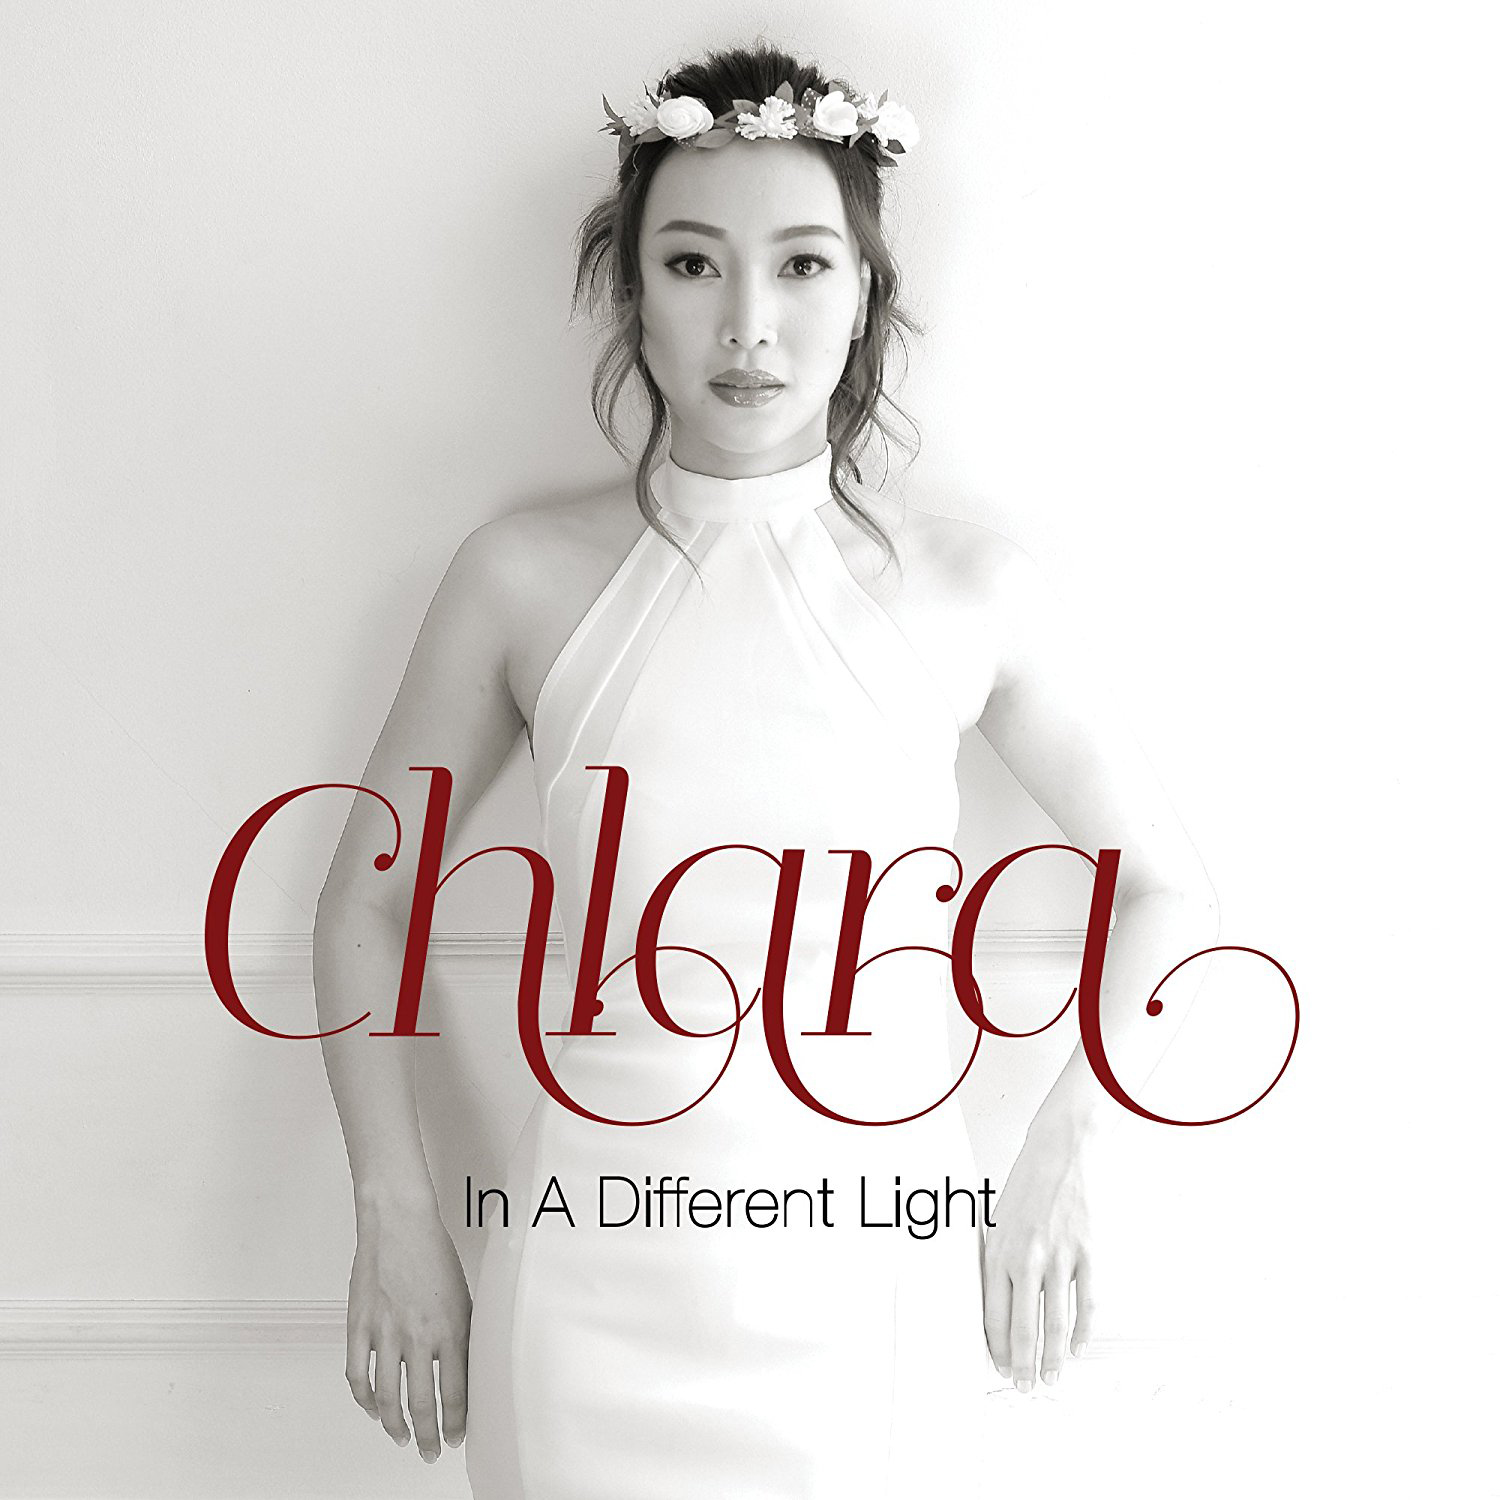 Chlara - In A Different Light (2016) SACD ISO + FLAC 24bit/96kHz